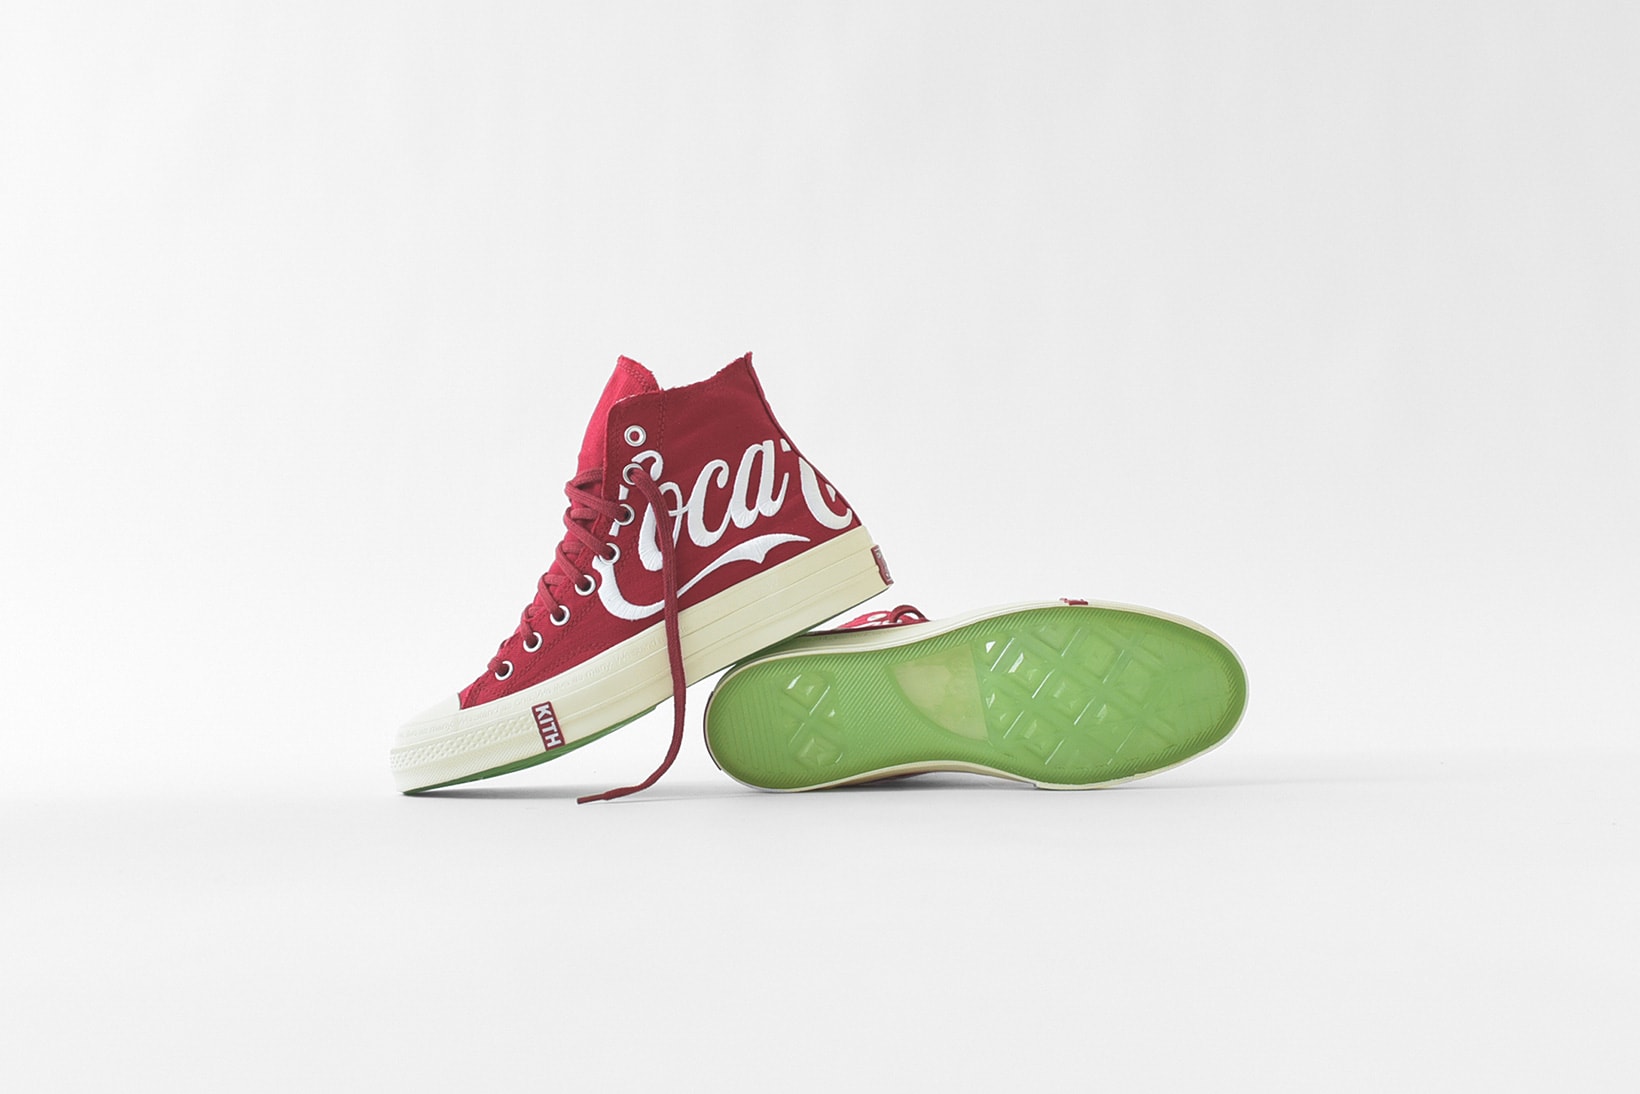 Coca Cola x KITH Summer 2018 Capsule Collection Ronnie Fieg Converse Chuck Taylor 70 Apparel August 18 Release Date Information How to Buy